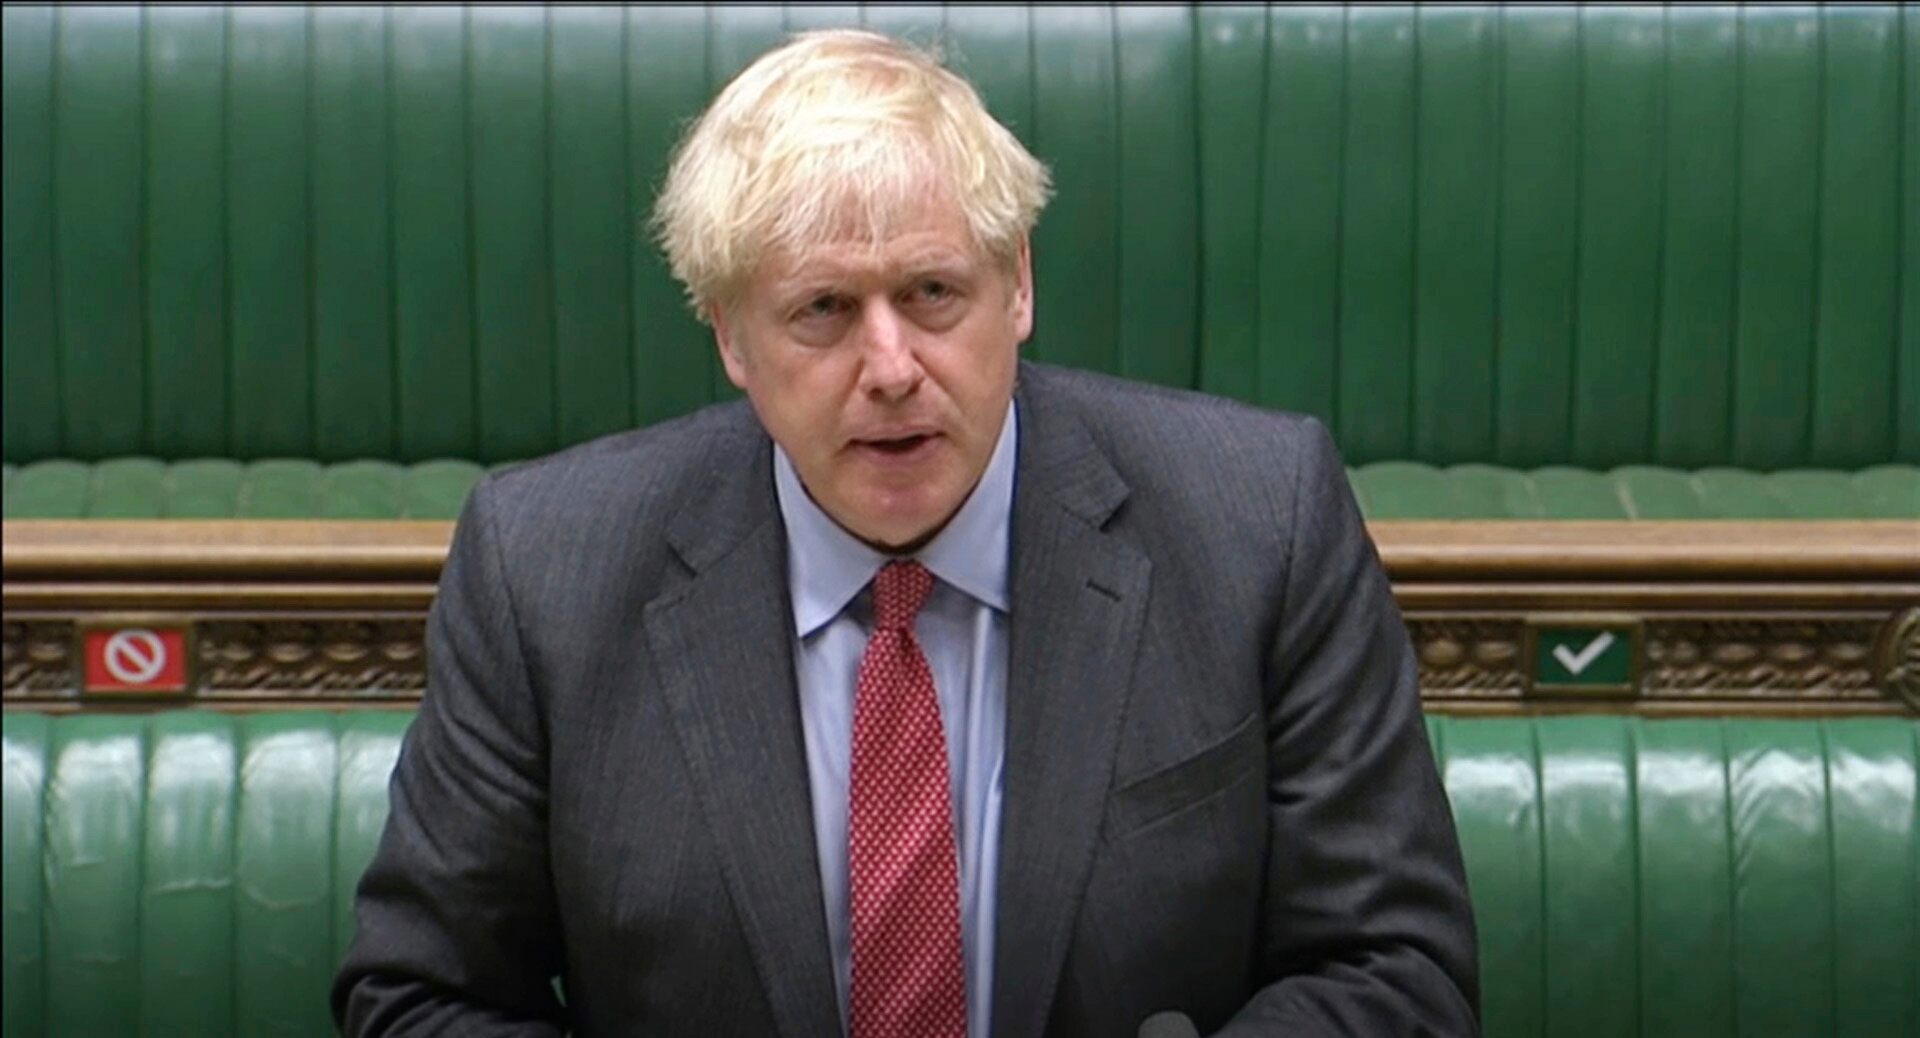 British Boris Johnson announced new measures to prevent Corona virus: ‘This is the moment we must act’